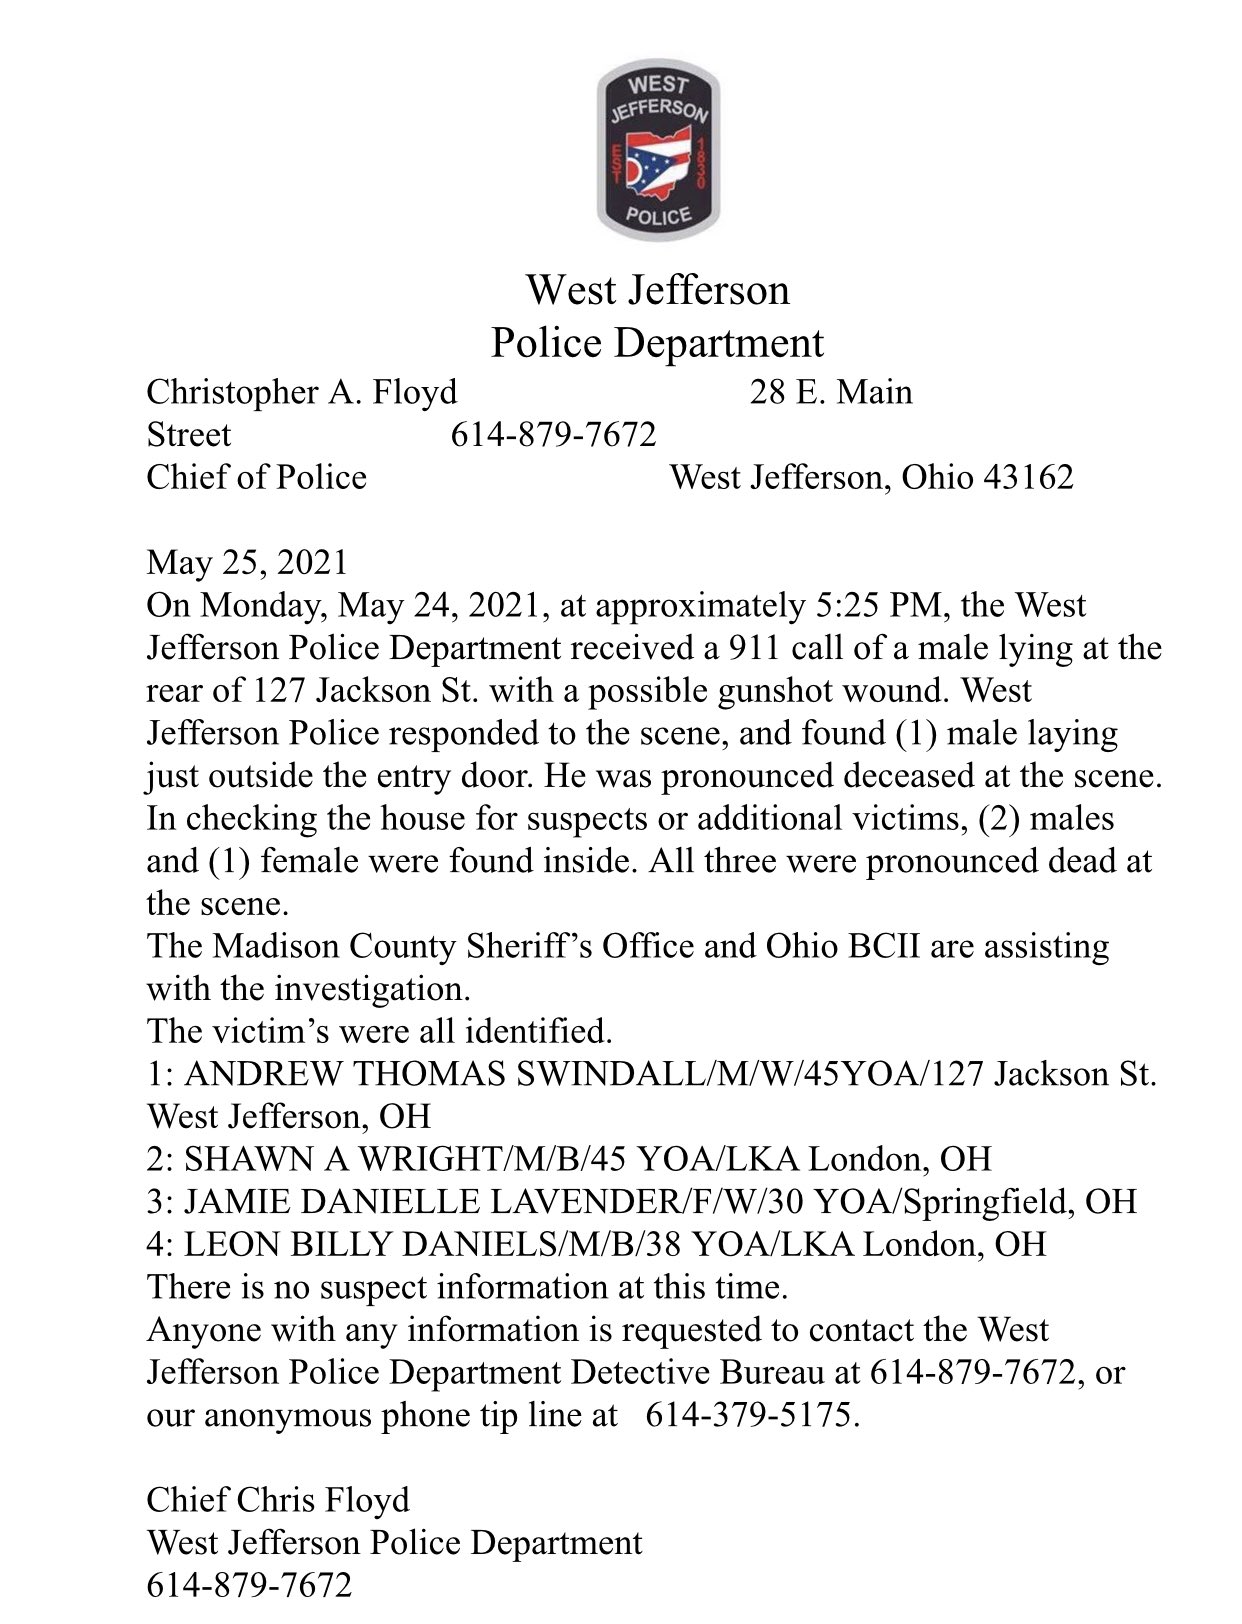 A statement of the incident from the West Jefferson Police Department. | Photo: Twitter/stevewsyx6